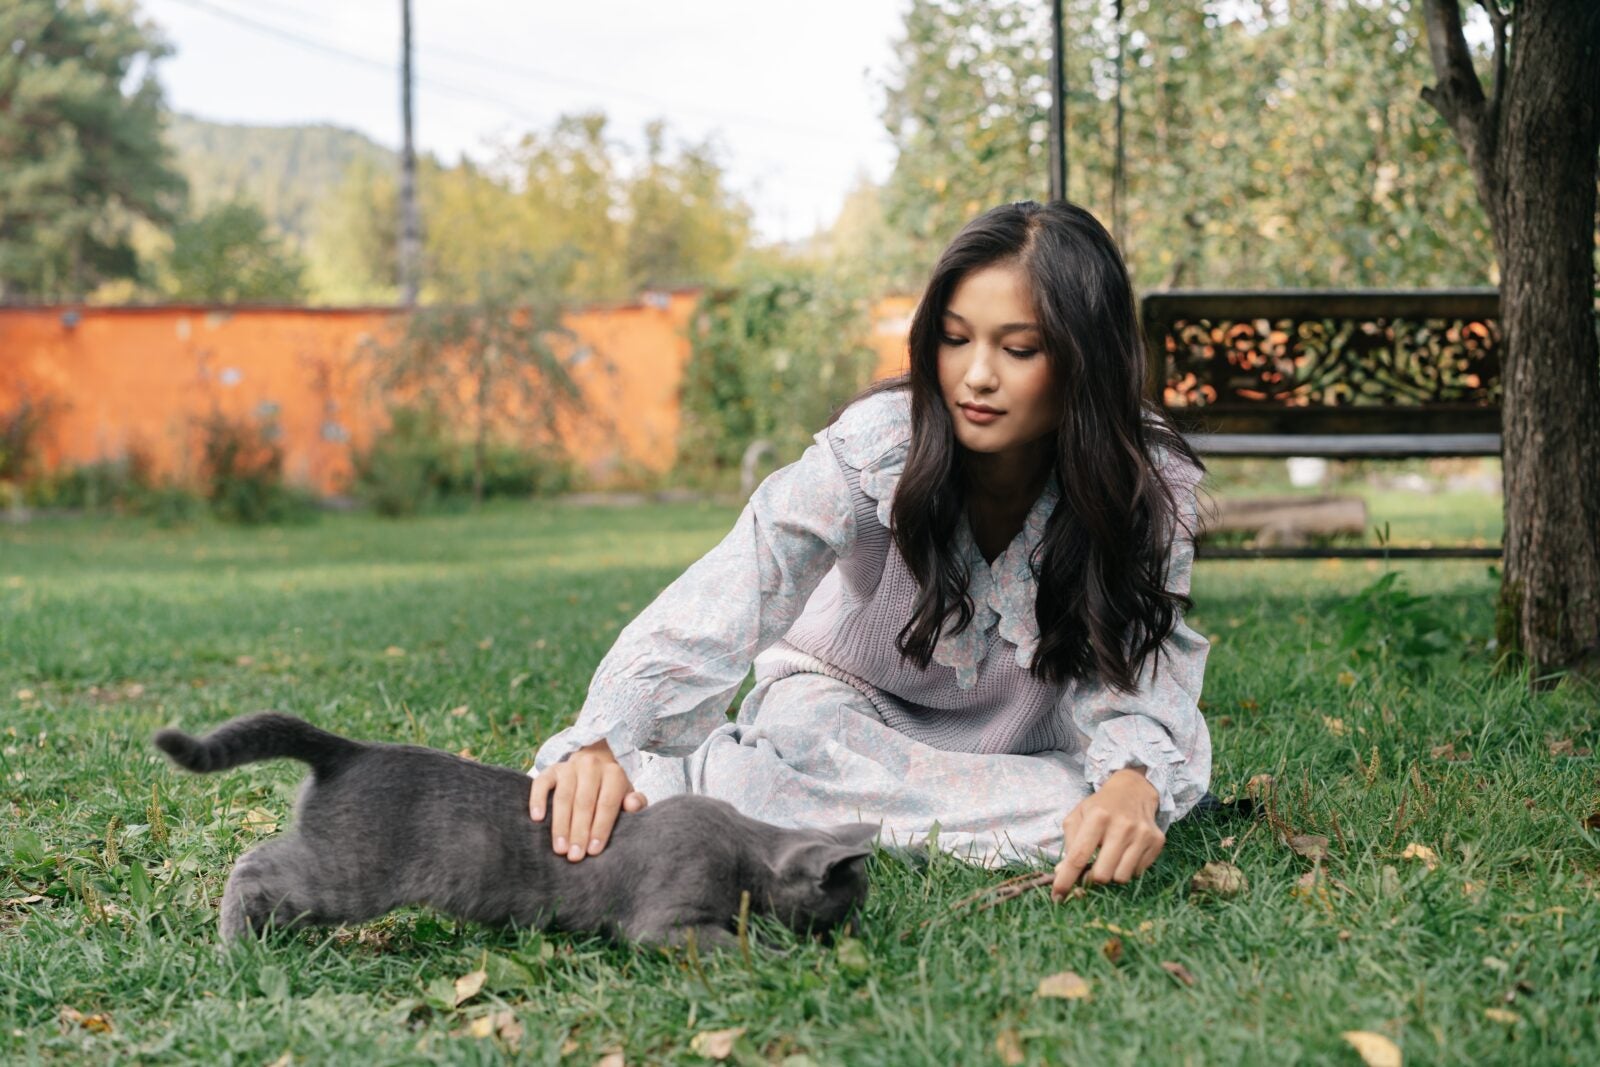 An Asian woman petting a cat while sitting on the grass.